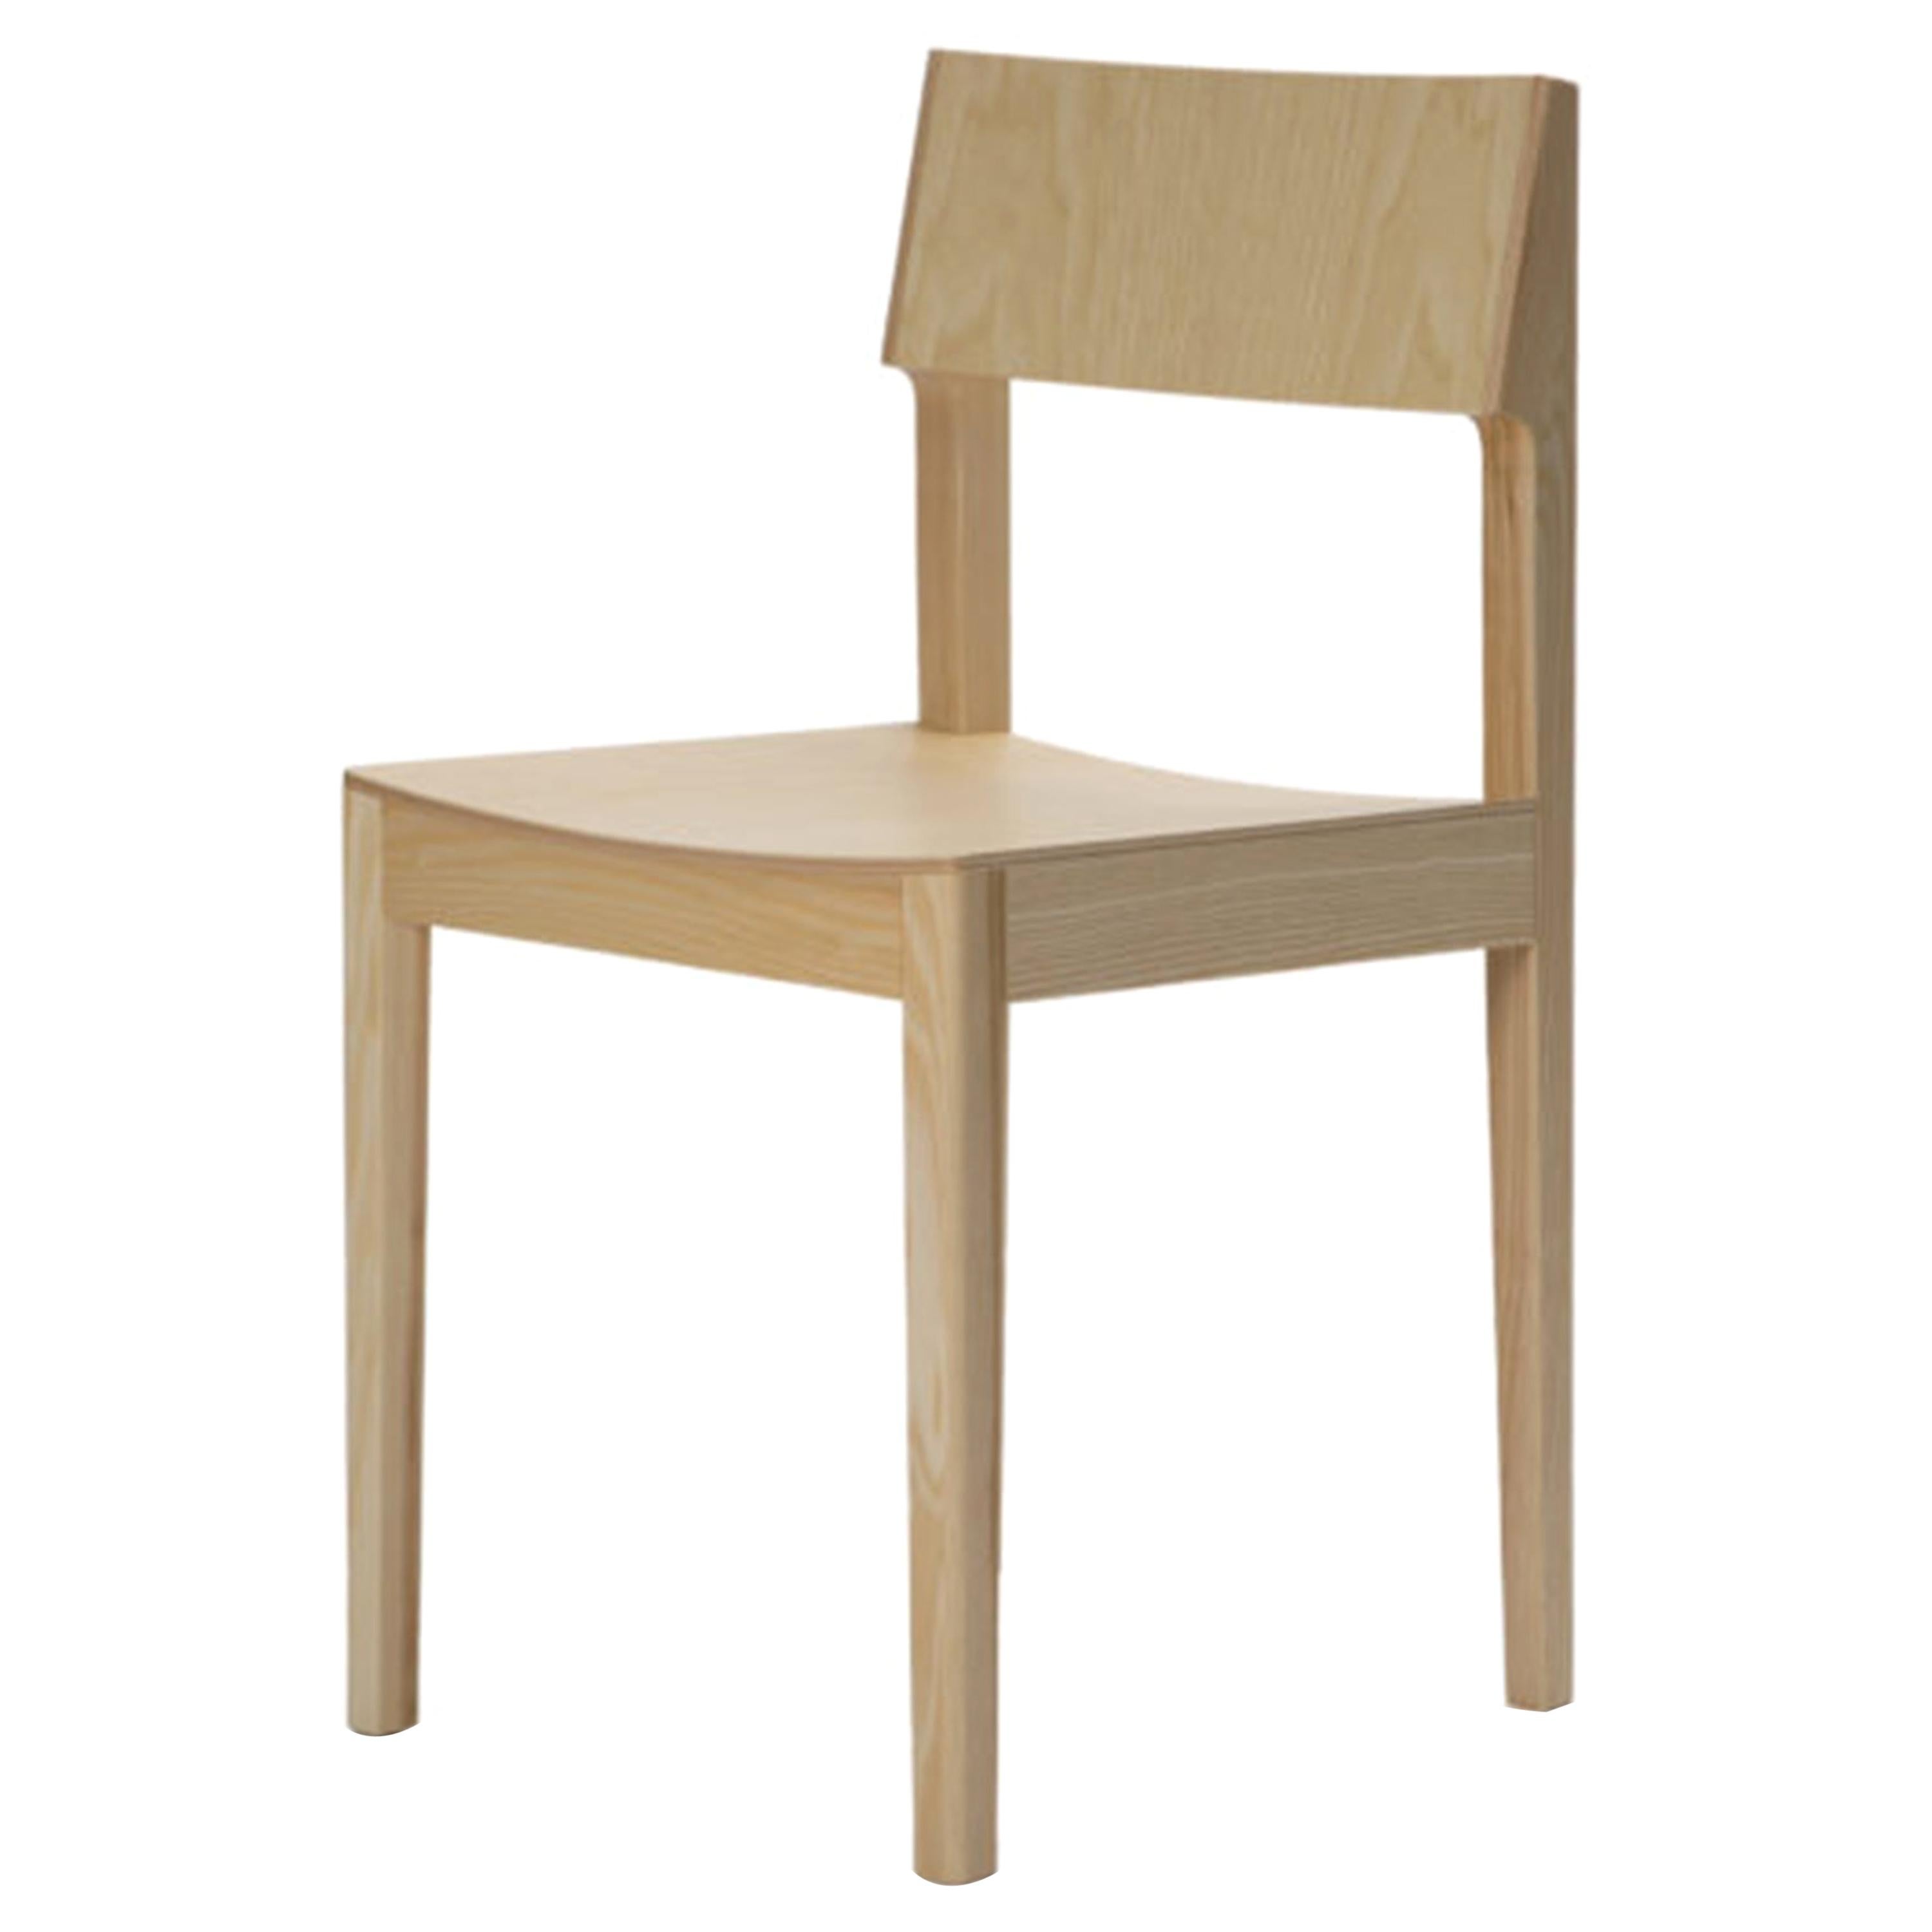 Inno Intro Stackable Wood Chair Designed by Ari Kanerva